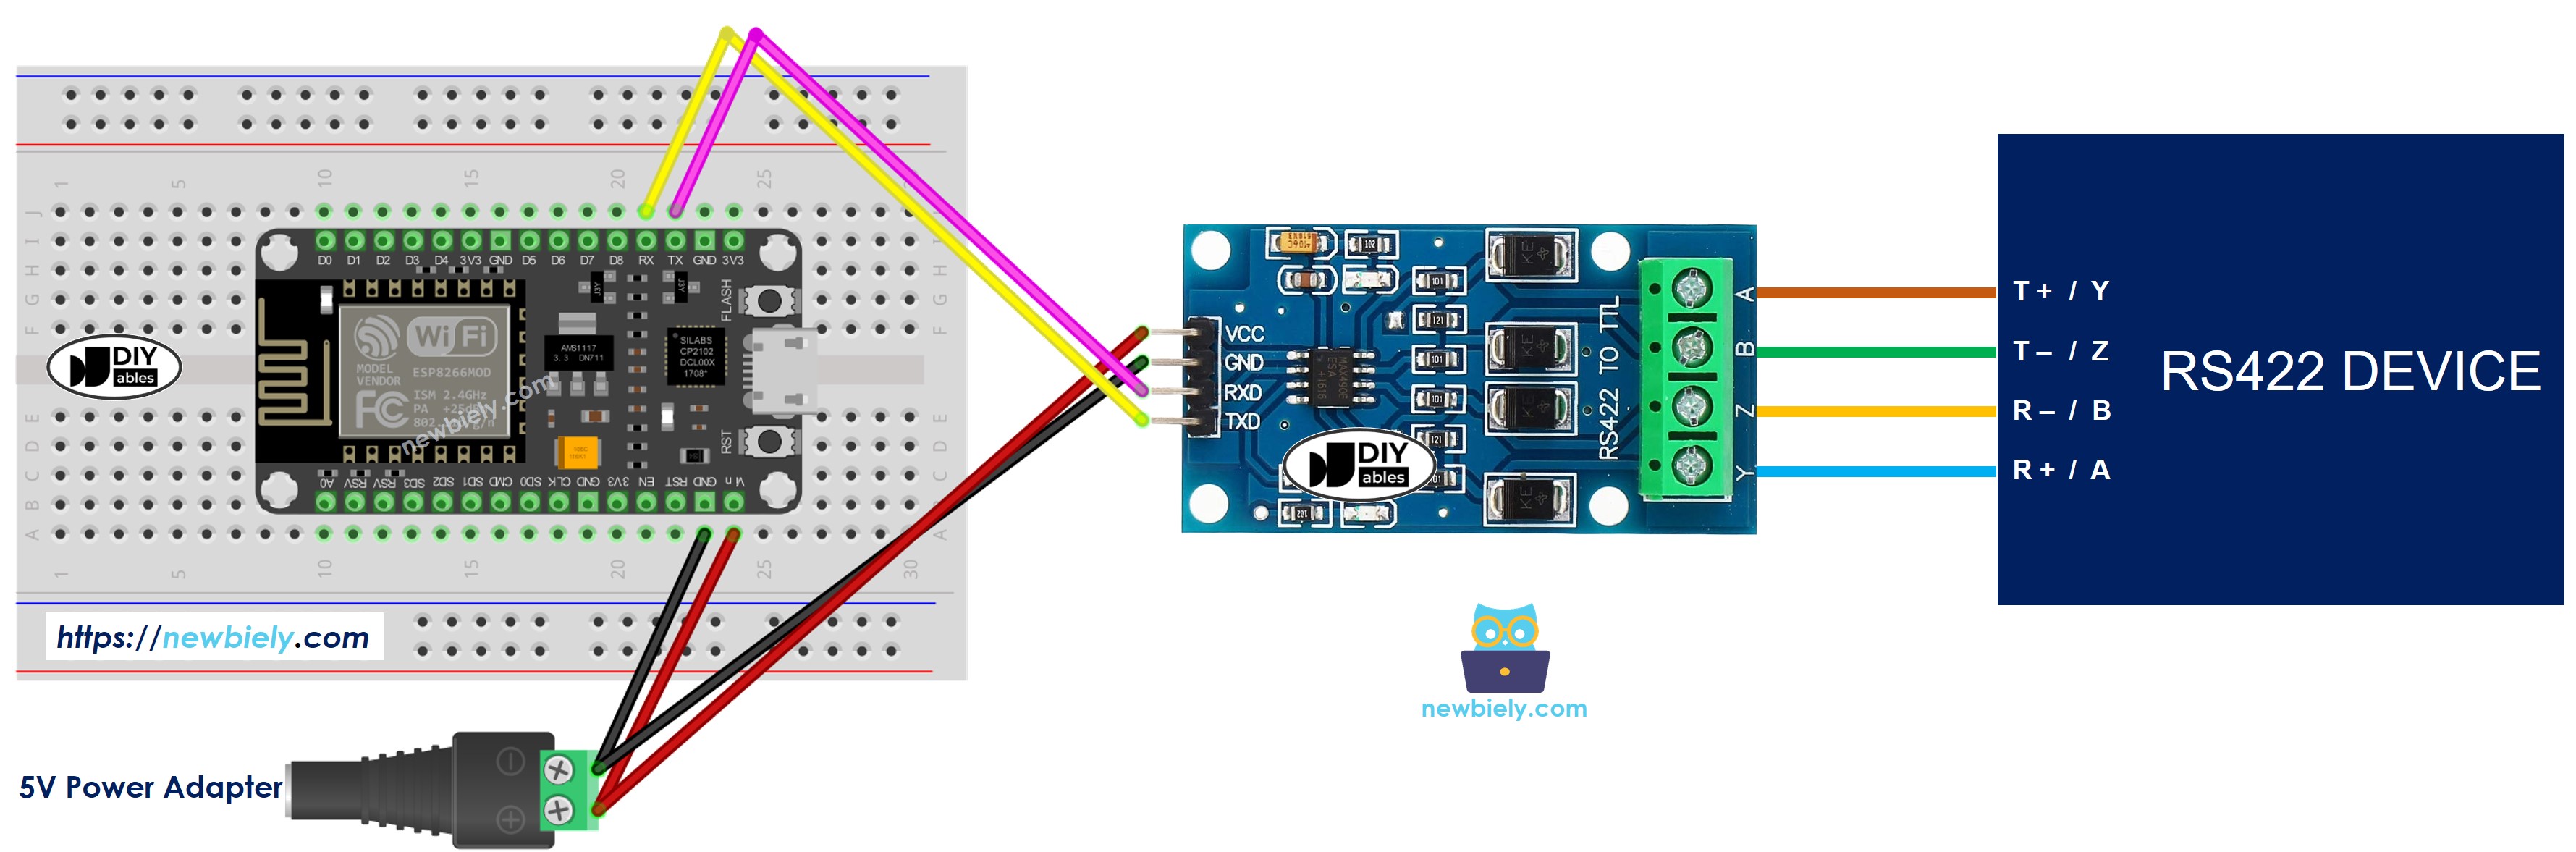 The wiring diagram between ESP8266 NodeMCU and TTL to RS422